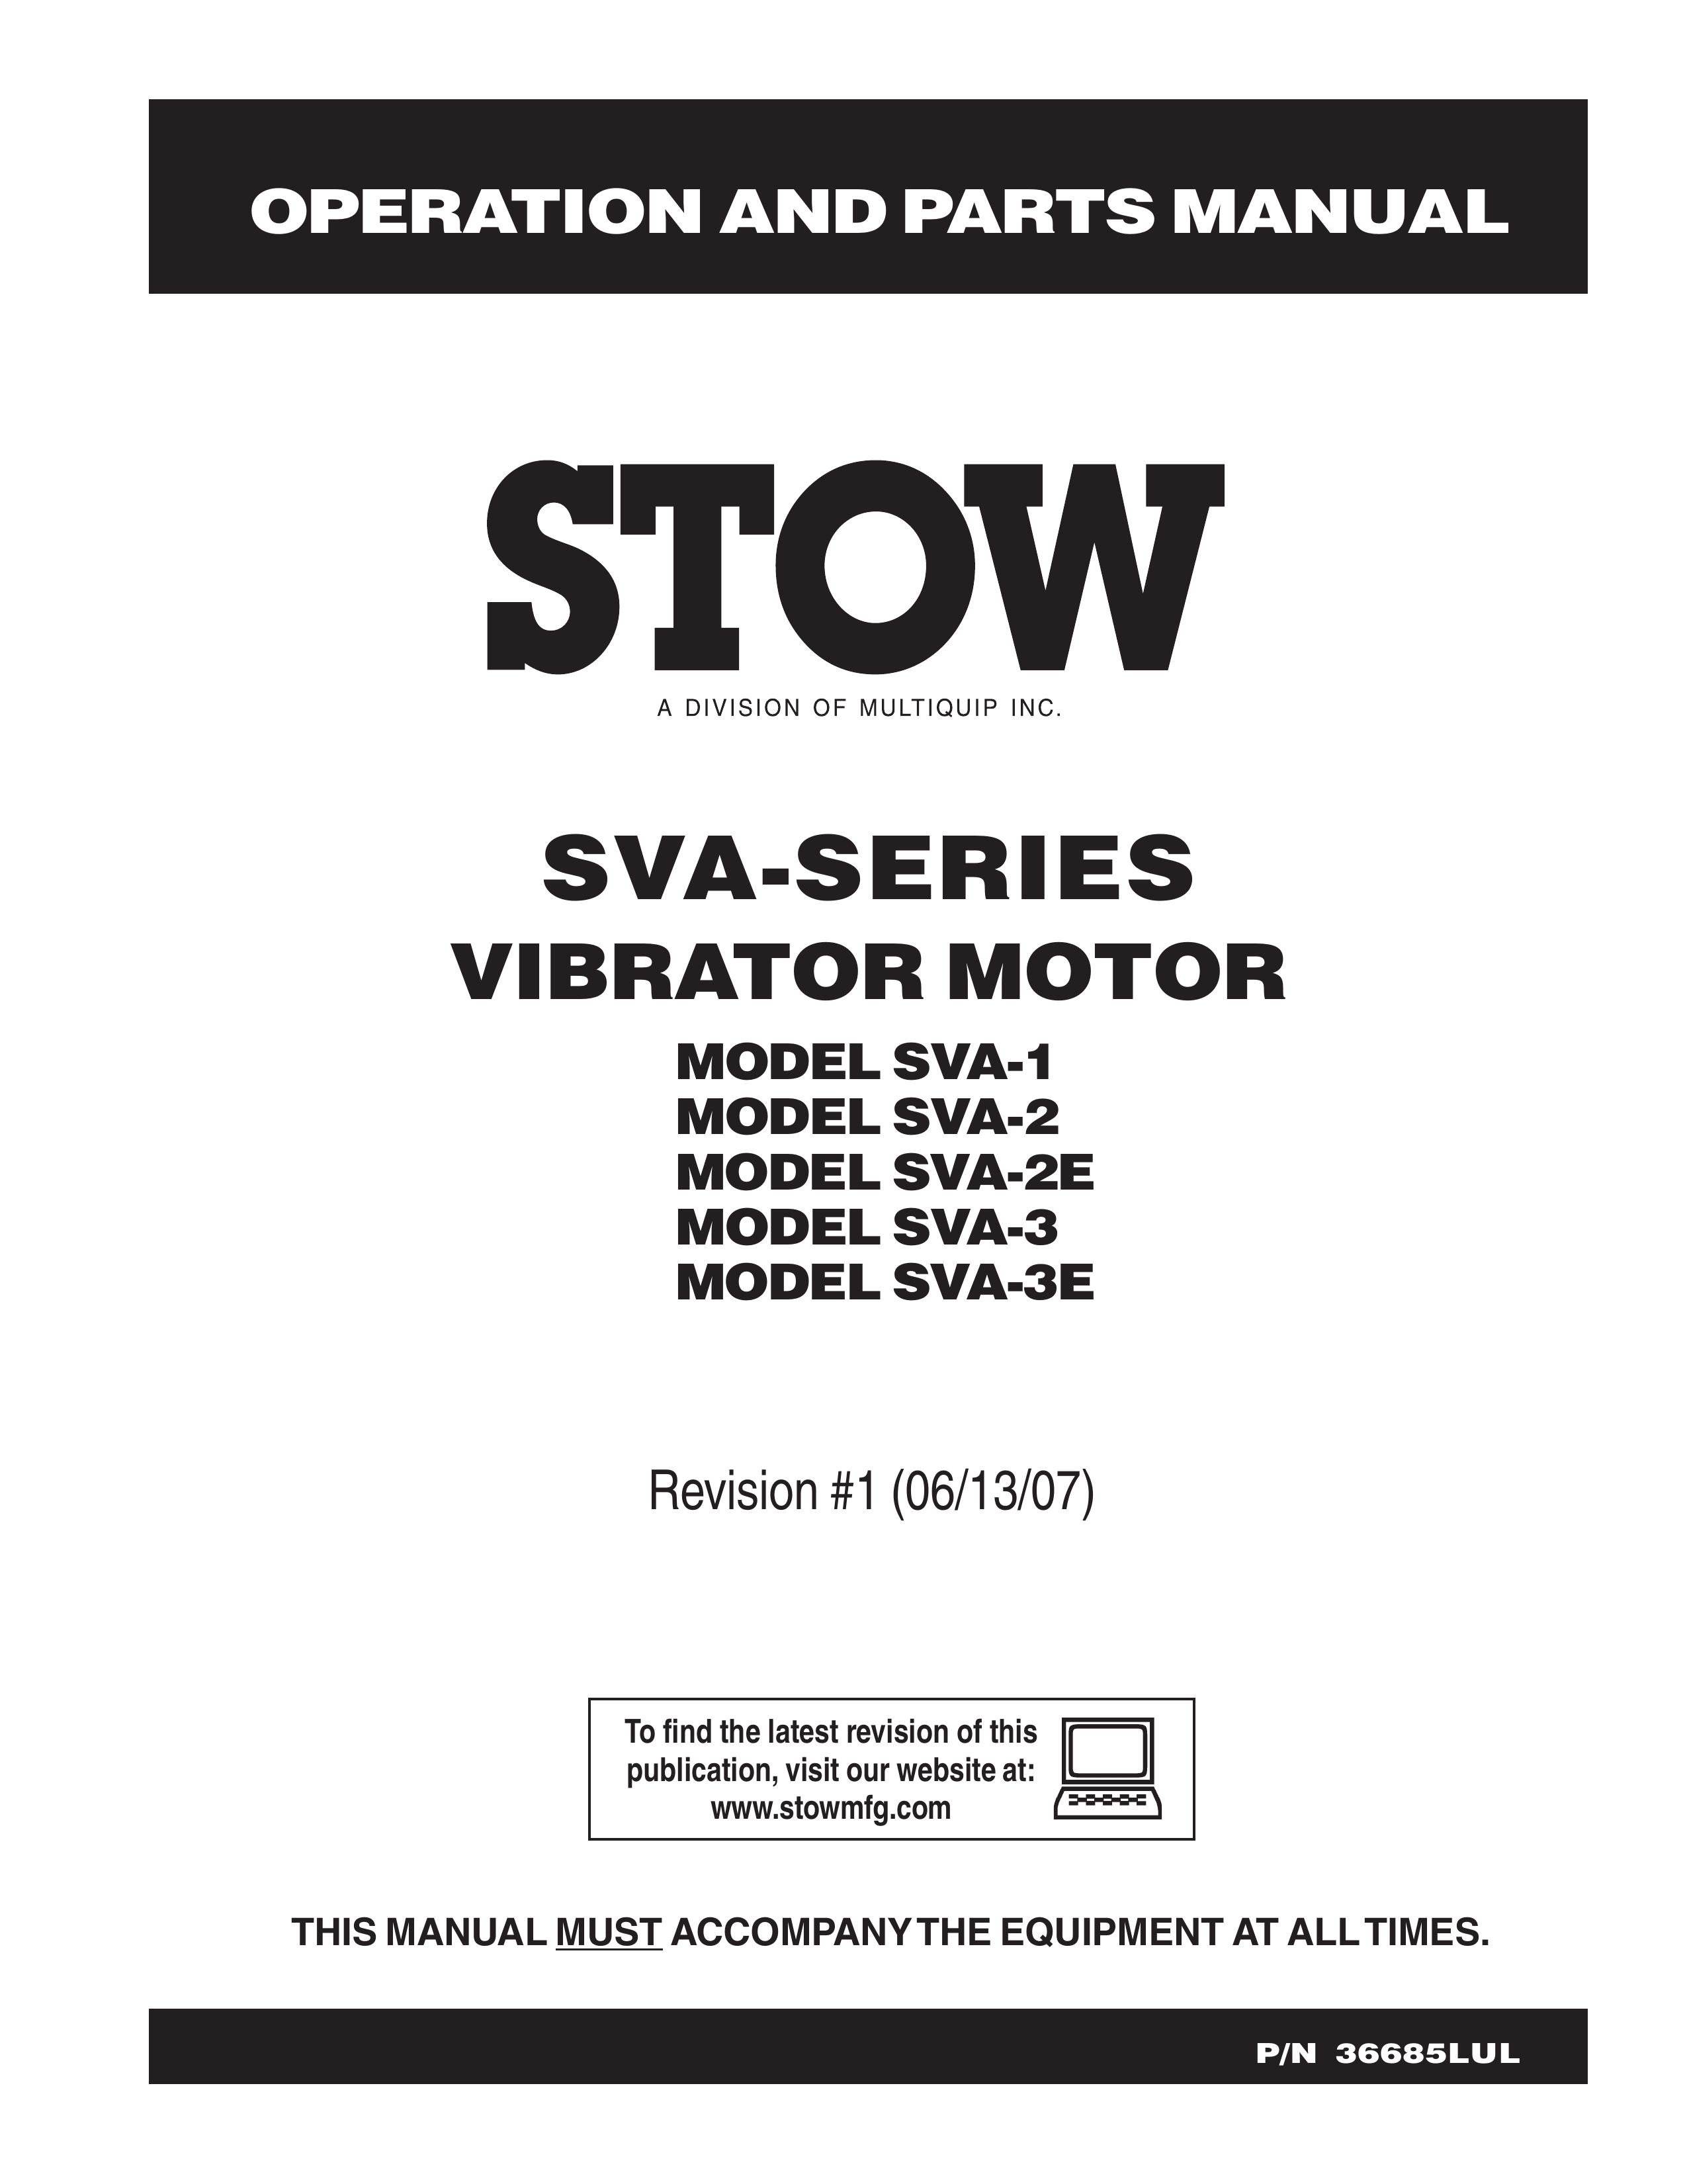 Stow SVA-3 Outboard Motor User Manual